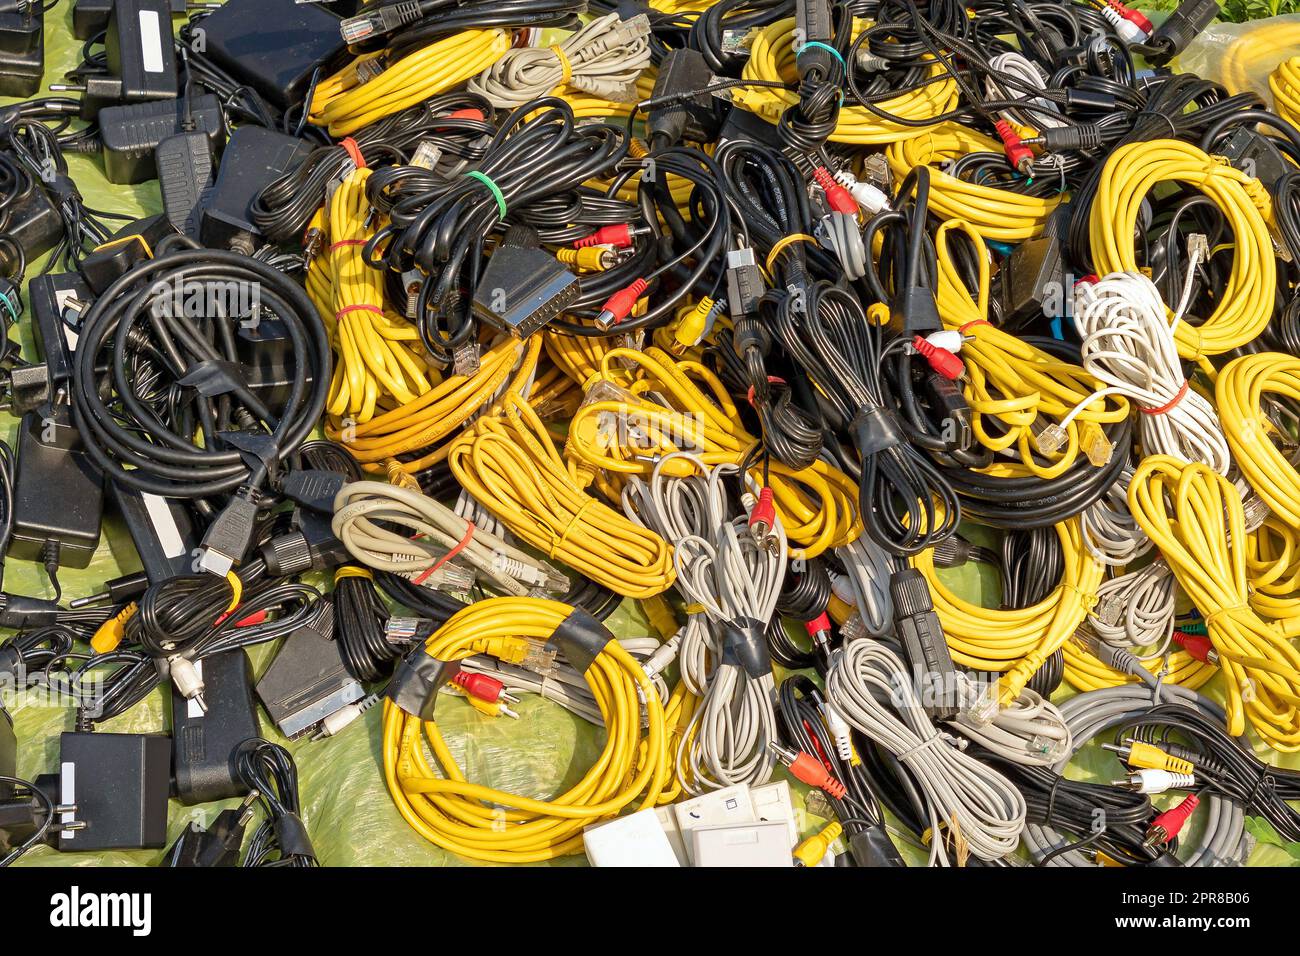 Connection cables sold on market Stock Photo